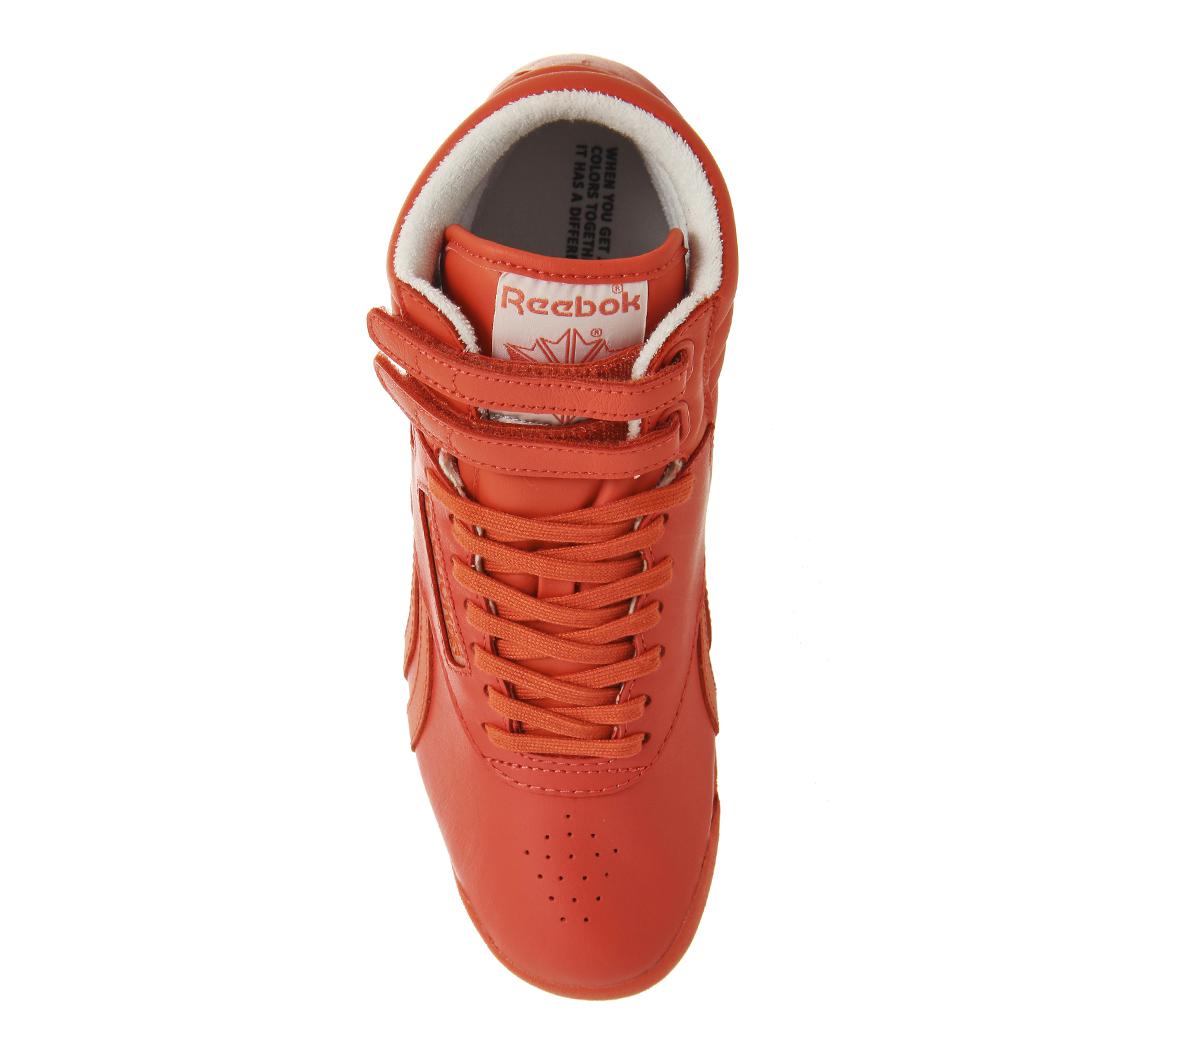 Buy > red reebok classic high top > in stock